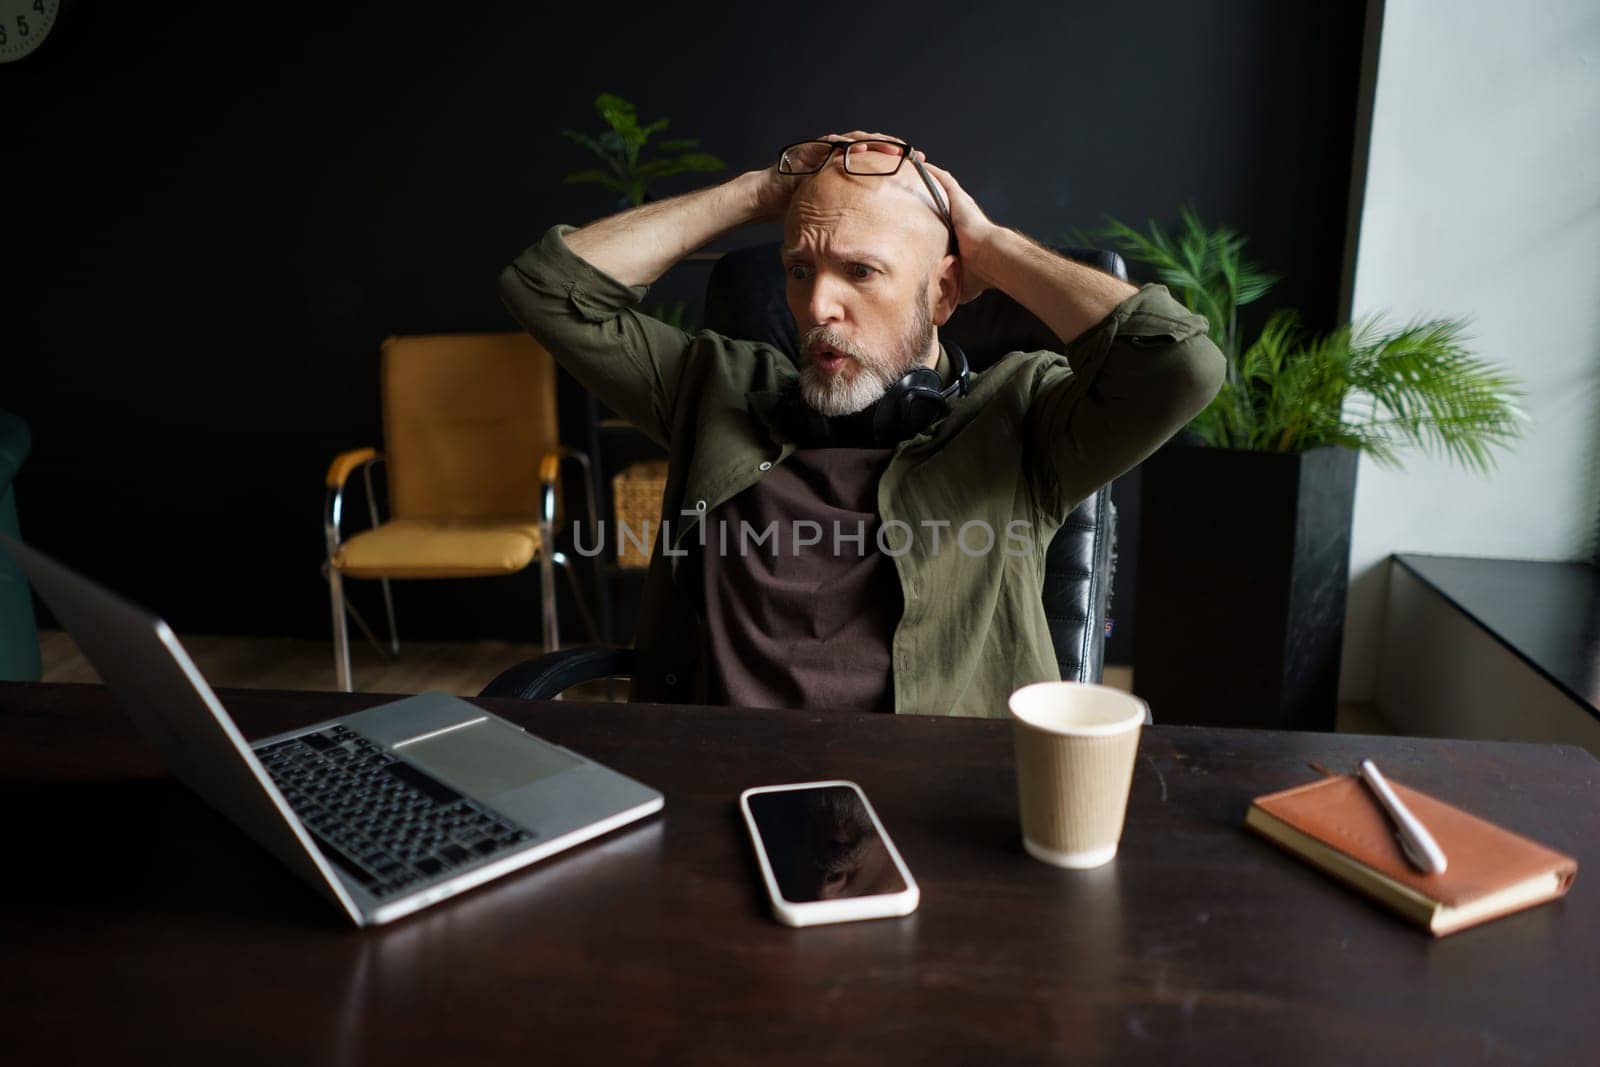 Man sitting in chair in loft office with unpleasant surprise. His face shows mixture of shock and disbelief, and he screaming with hands raised in air. Desk holding a laptop and other office supplies. High quality photo